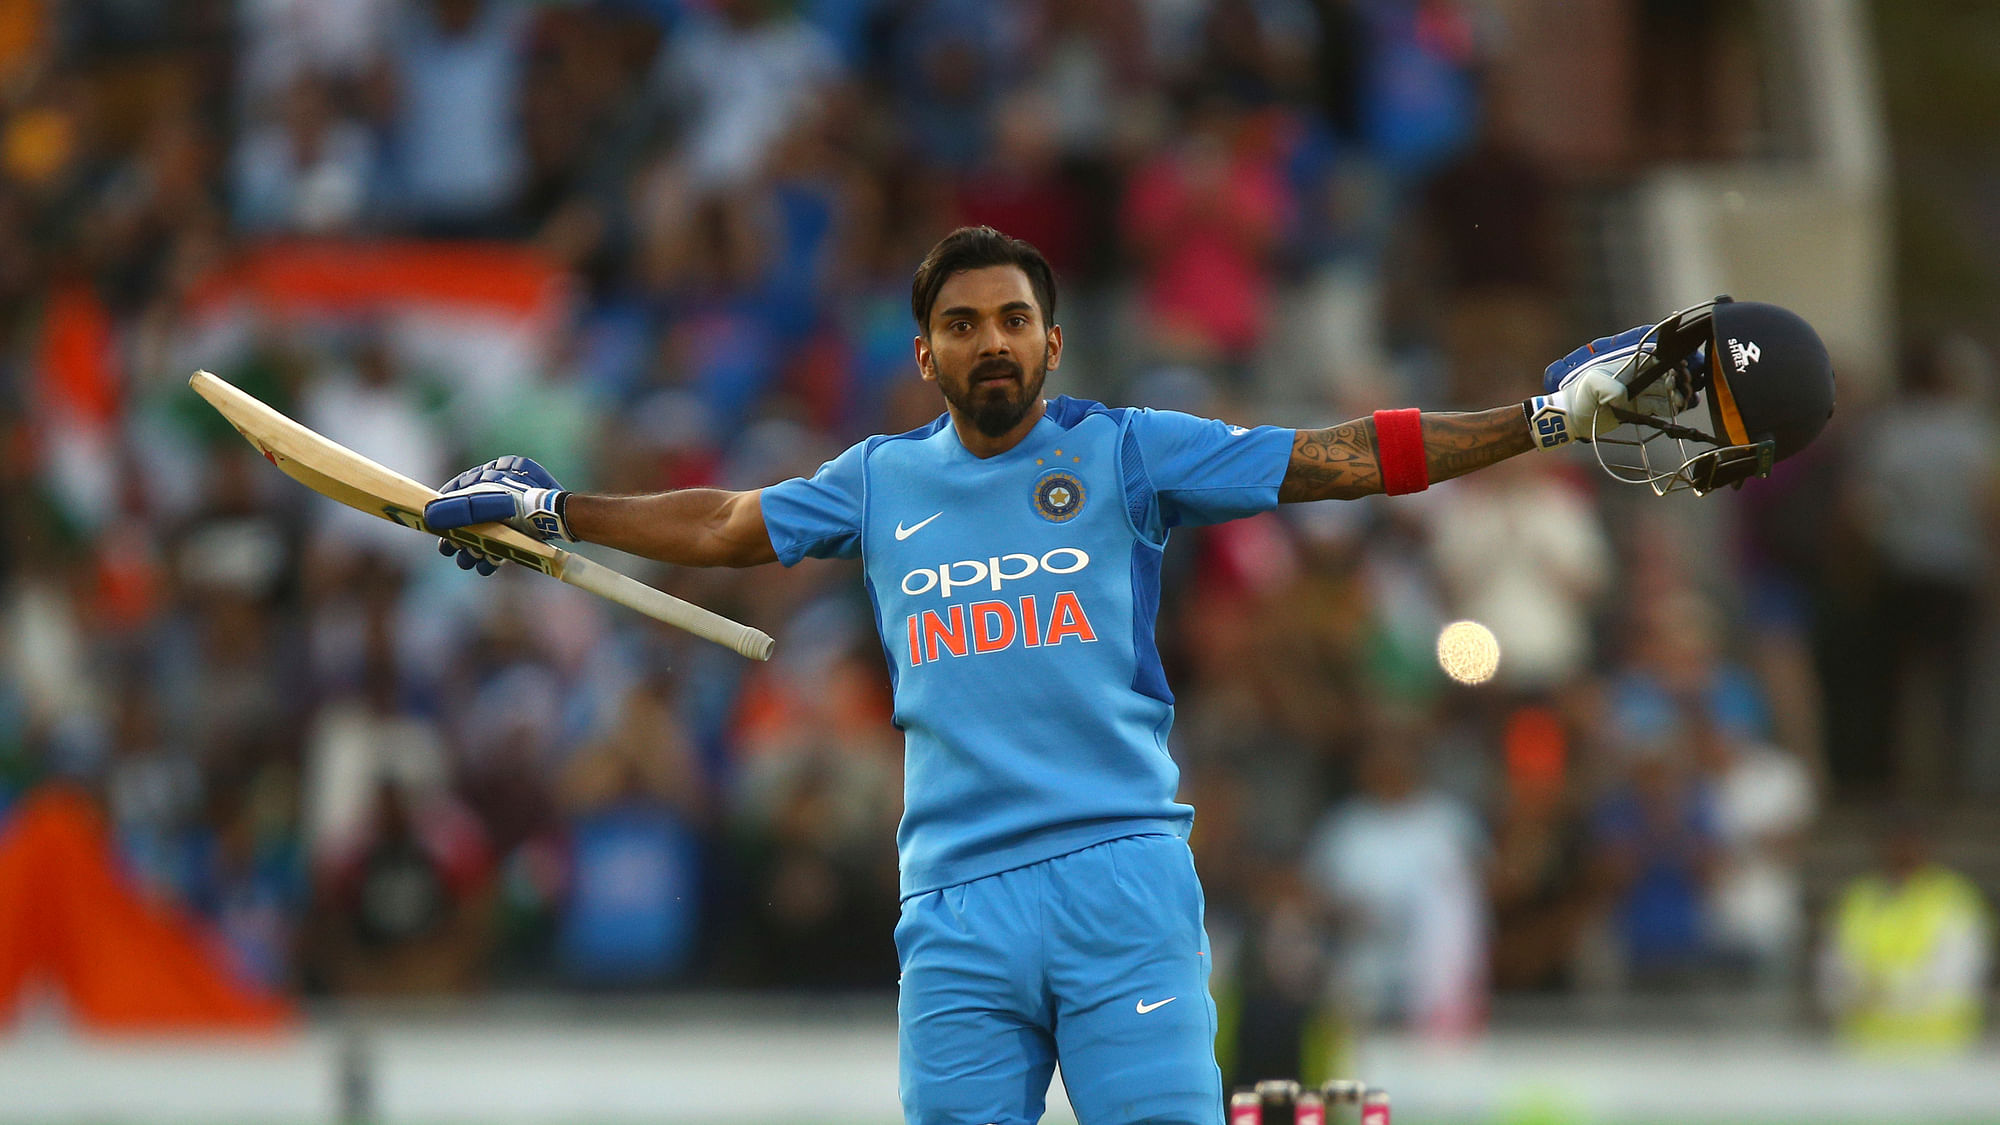 KL Rahul scored his second T20I century on Tuesday night, against England.